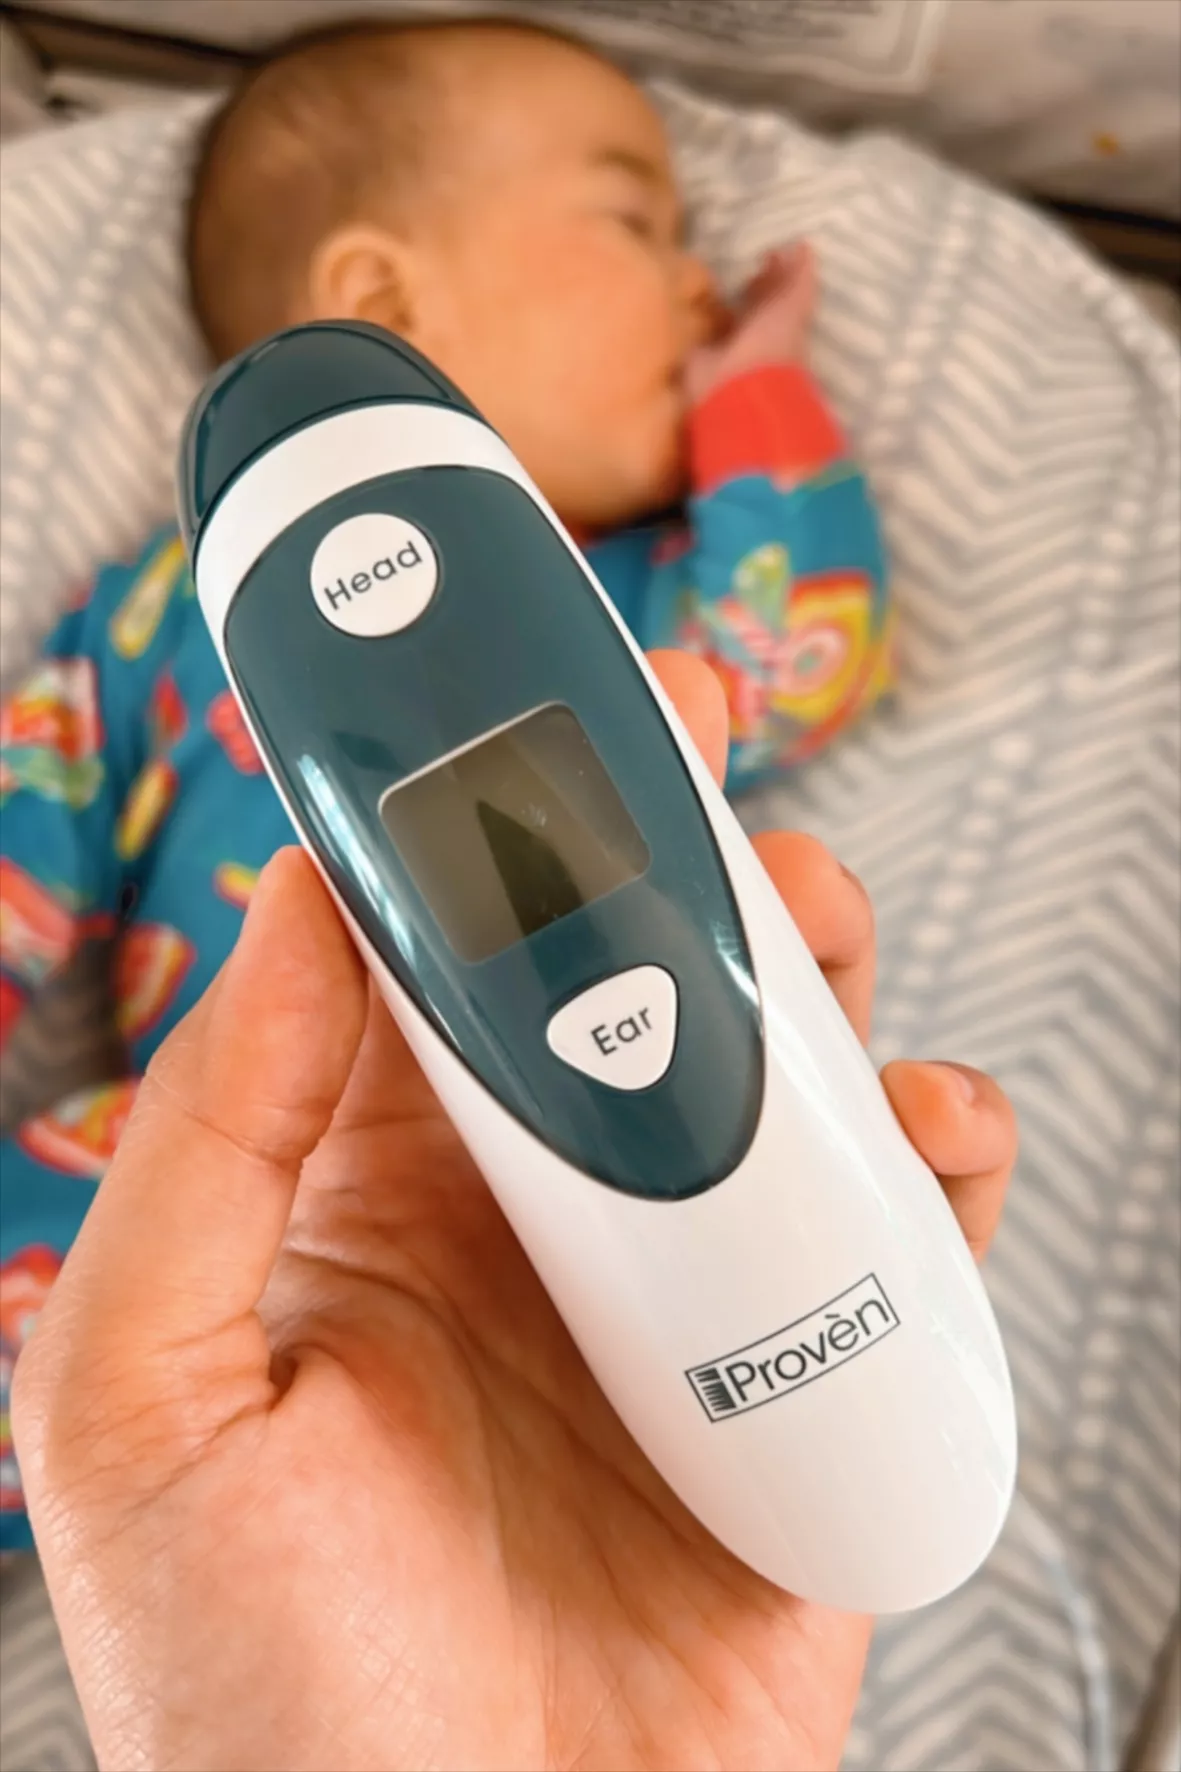 iProven DMT-489 Forehead Thermometer for Fever for Adults